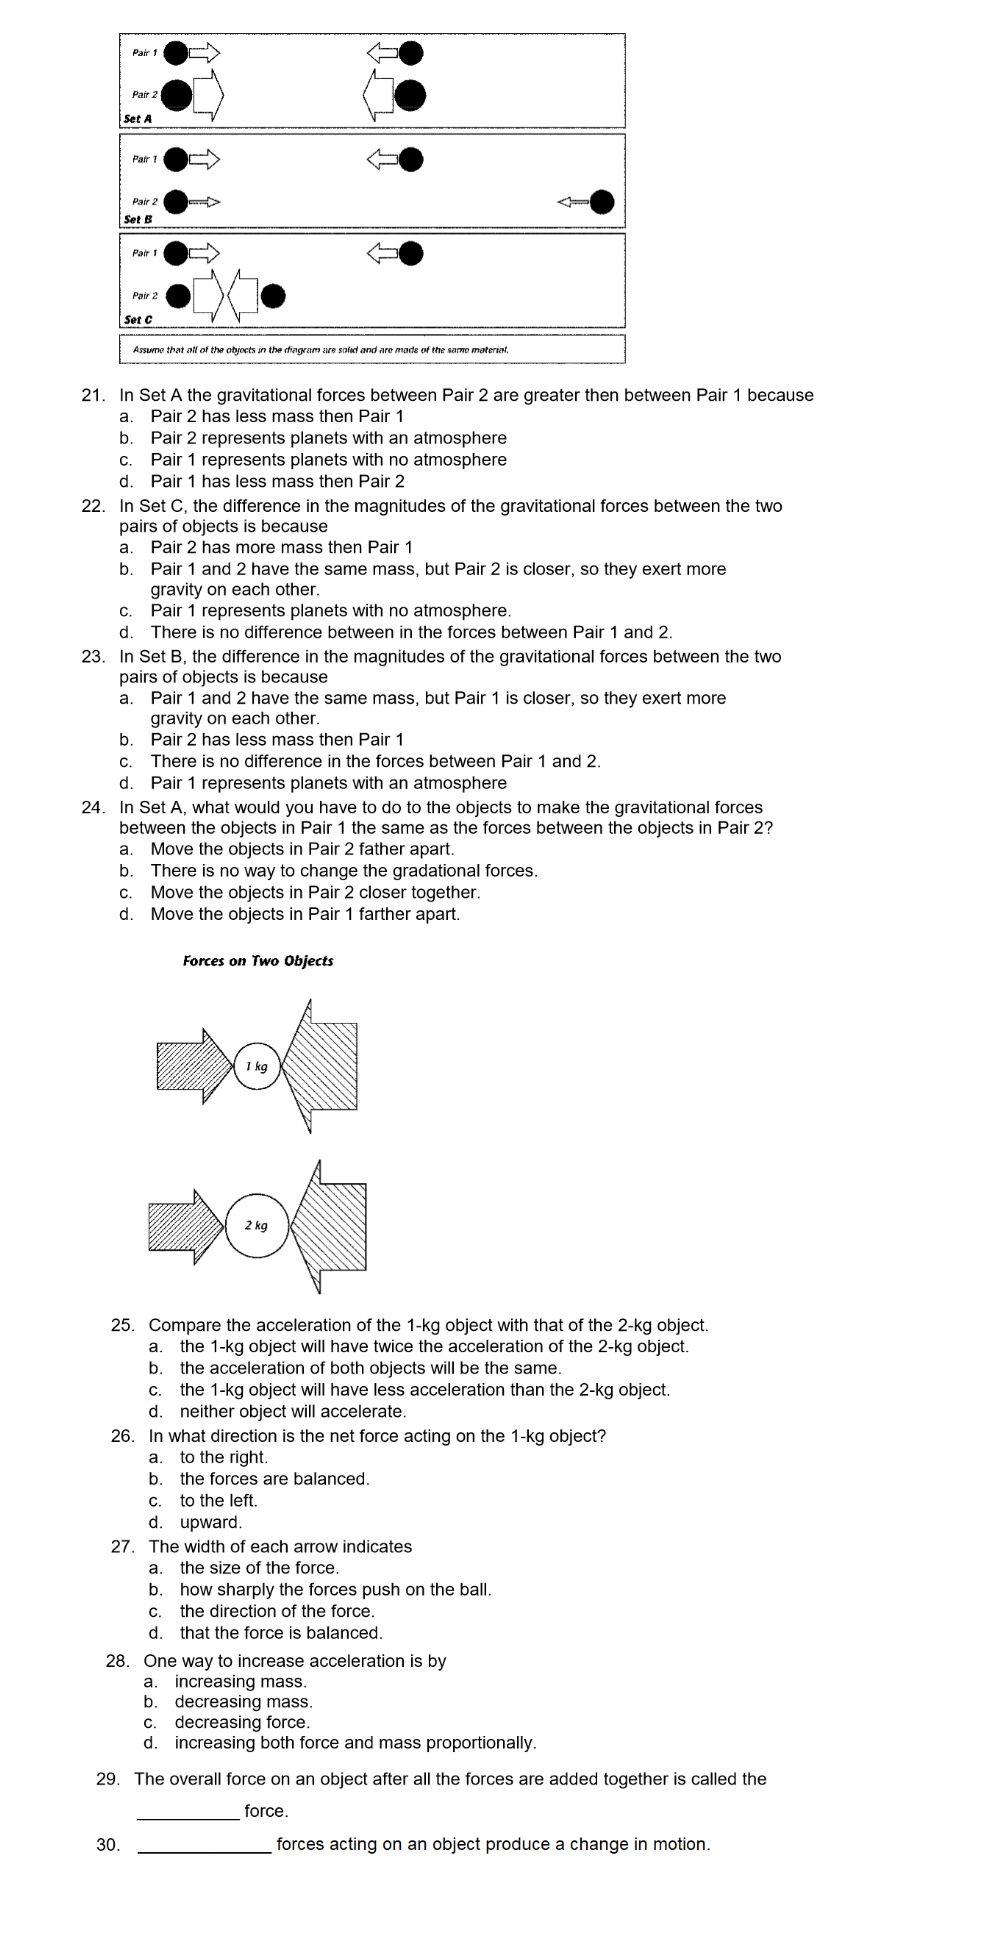 PS-10-Newton's Laws Review pg 3